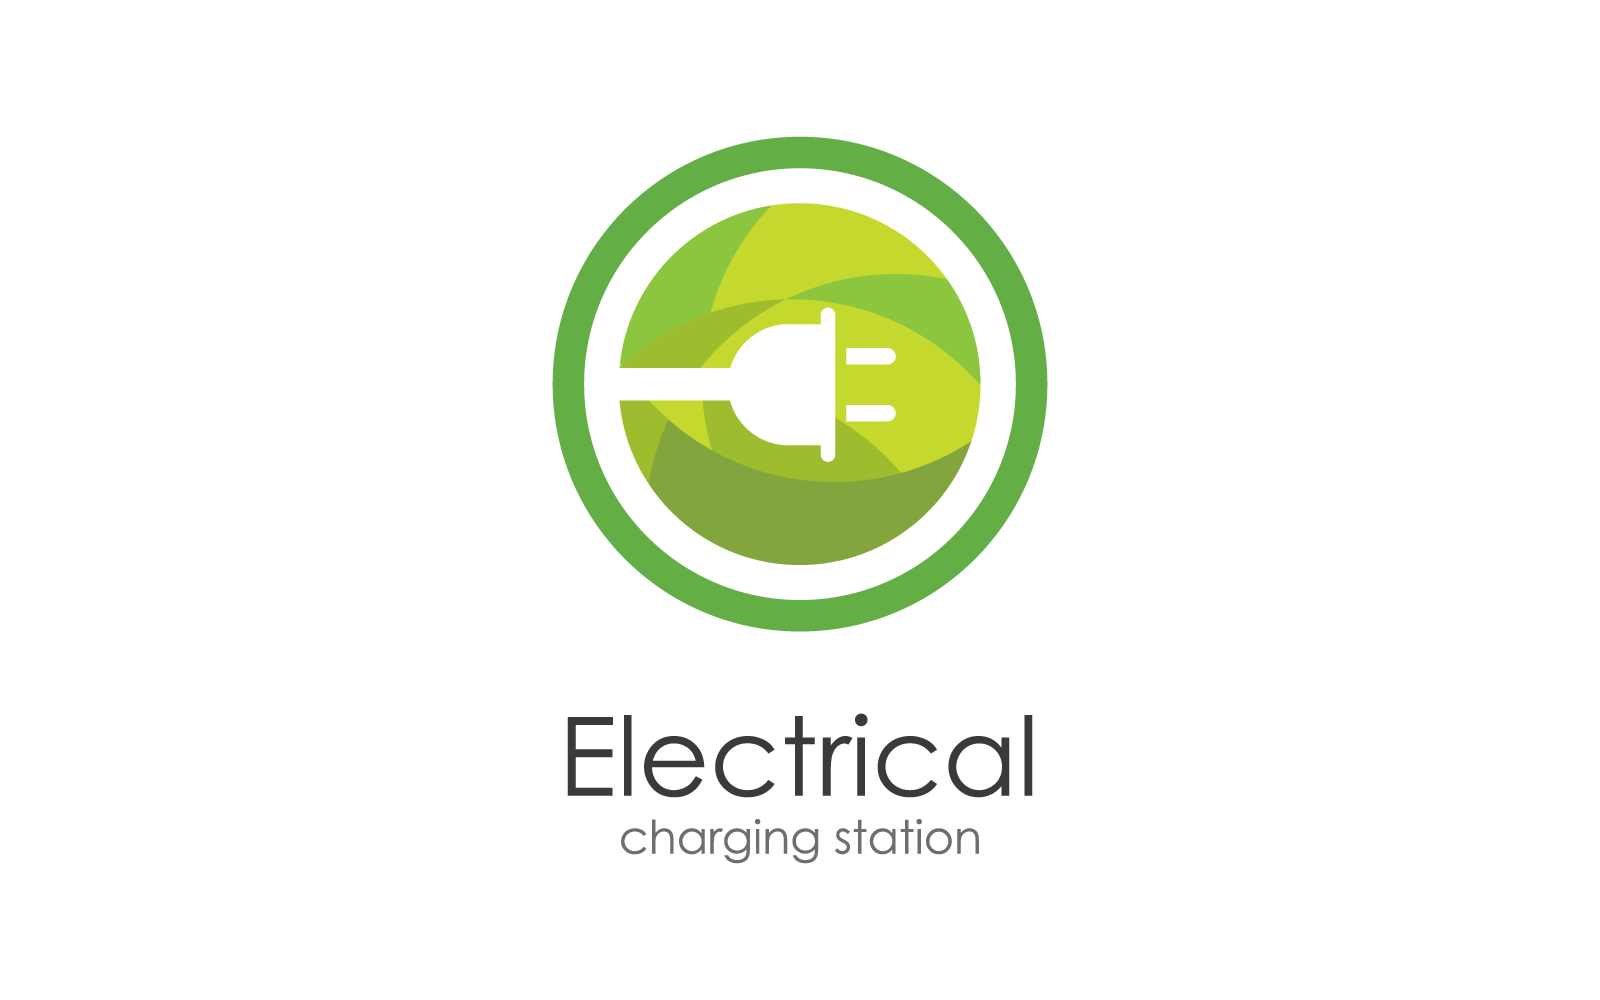 Electrical charging station logo vector icon